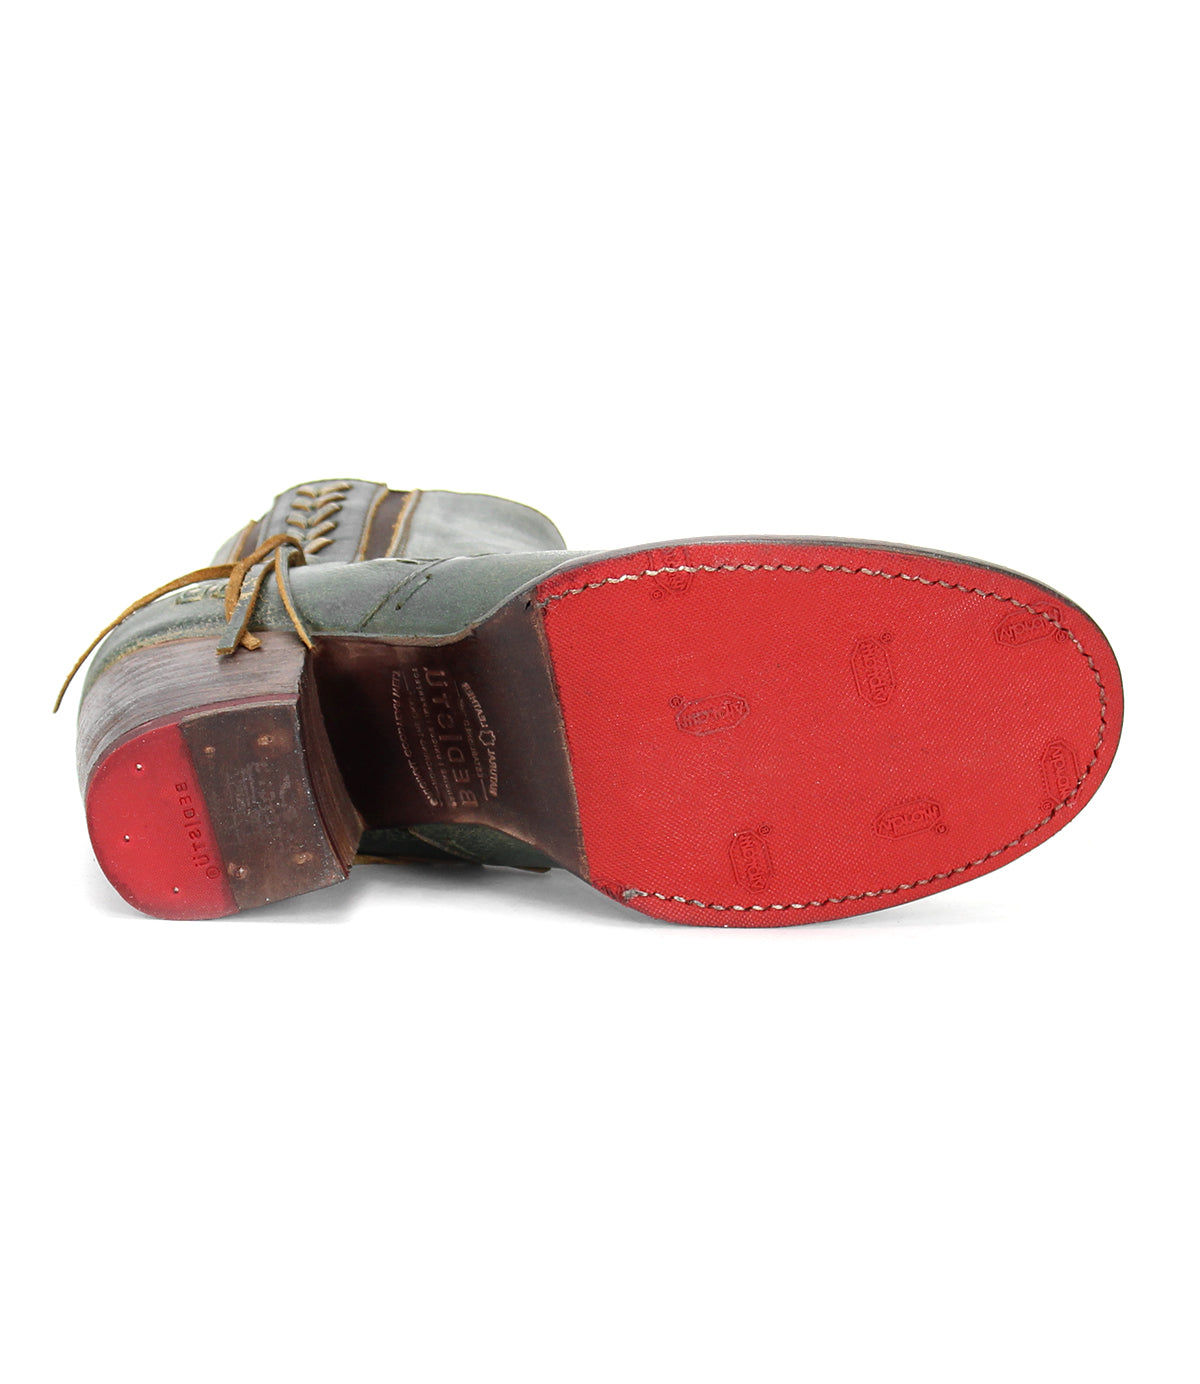 A pair of Bed Stu Celestine shoes with a red sole and a green sole.